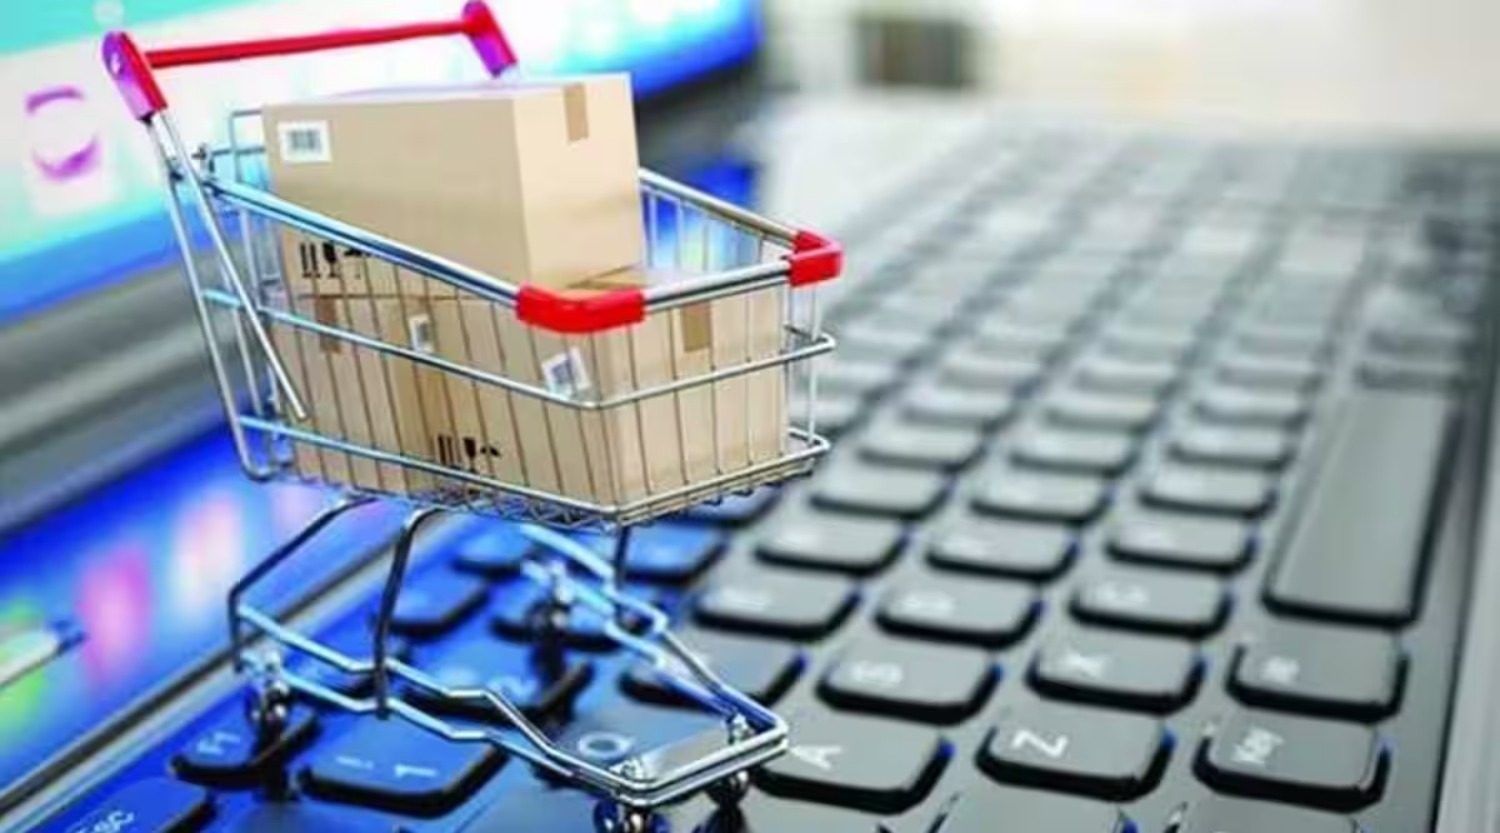 Amid criticism, Government relook at draft rules for e-commerce